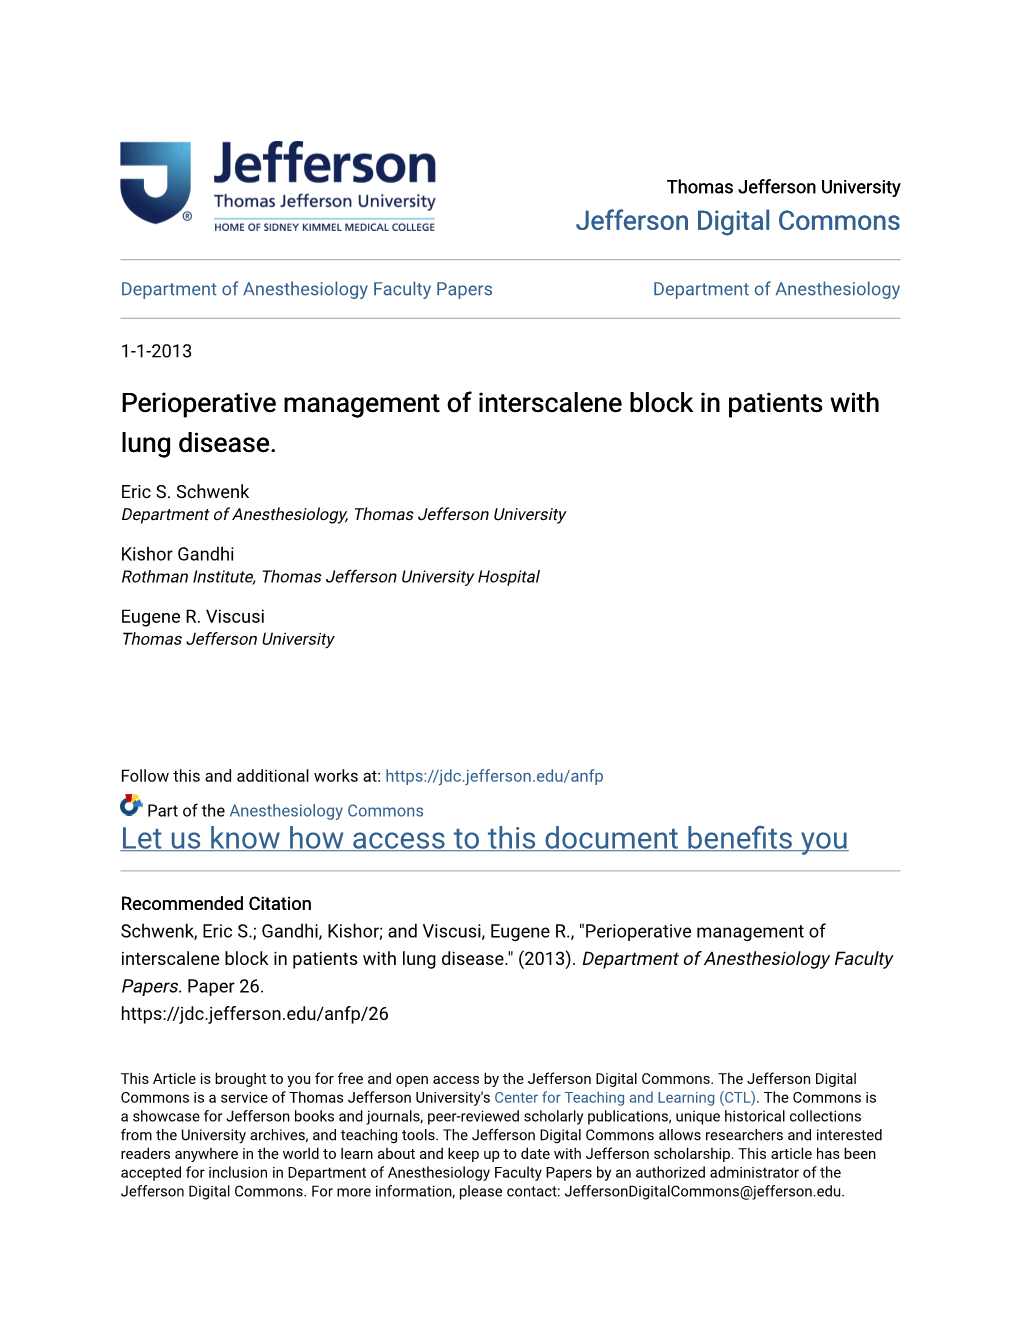 Perioperative Management of Interscalene Block in Patients with Lung Disease